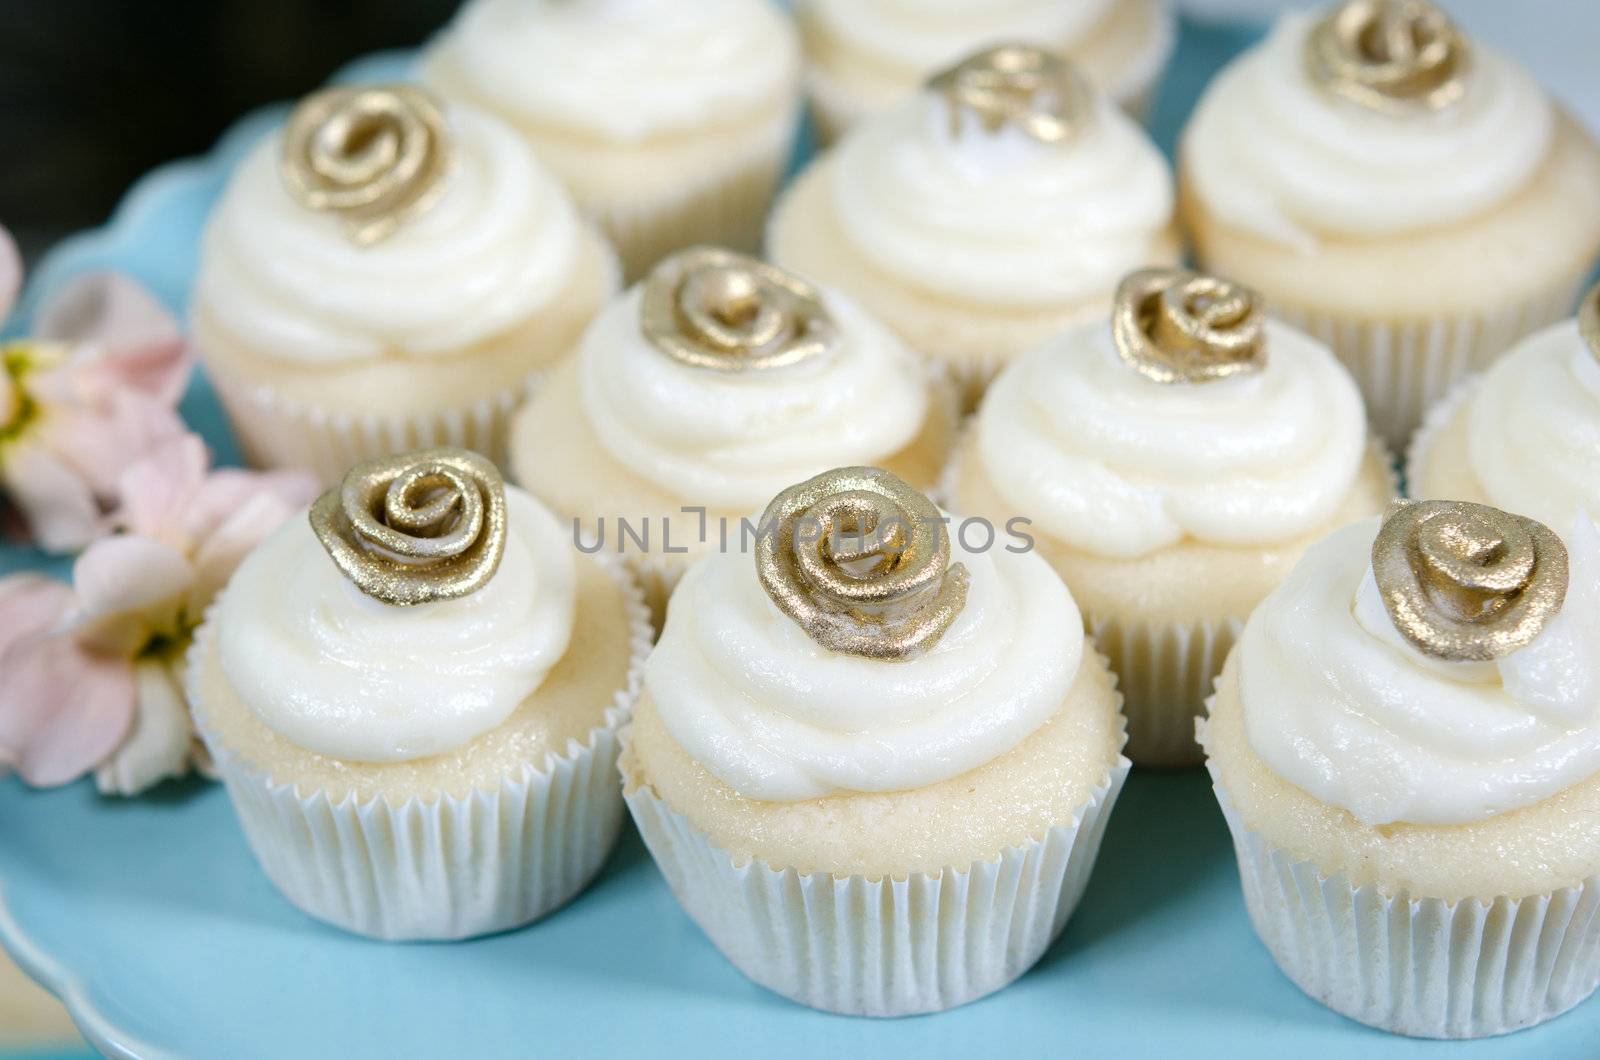 Image of beautifully decorated wedding cupcakes on a plate